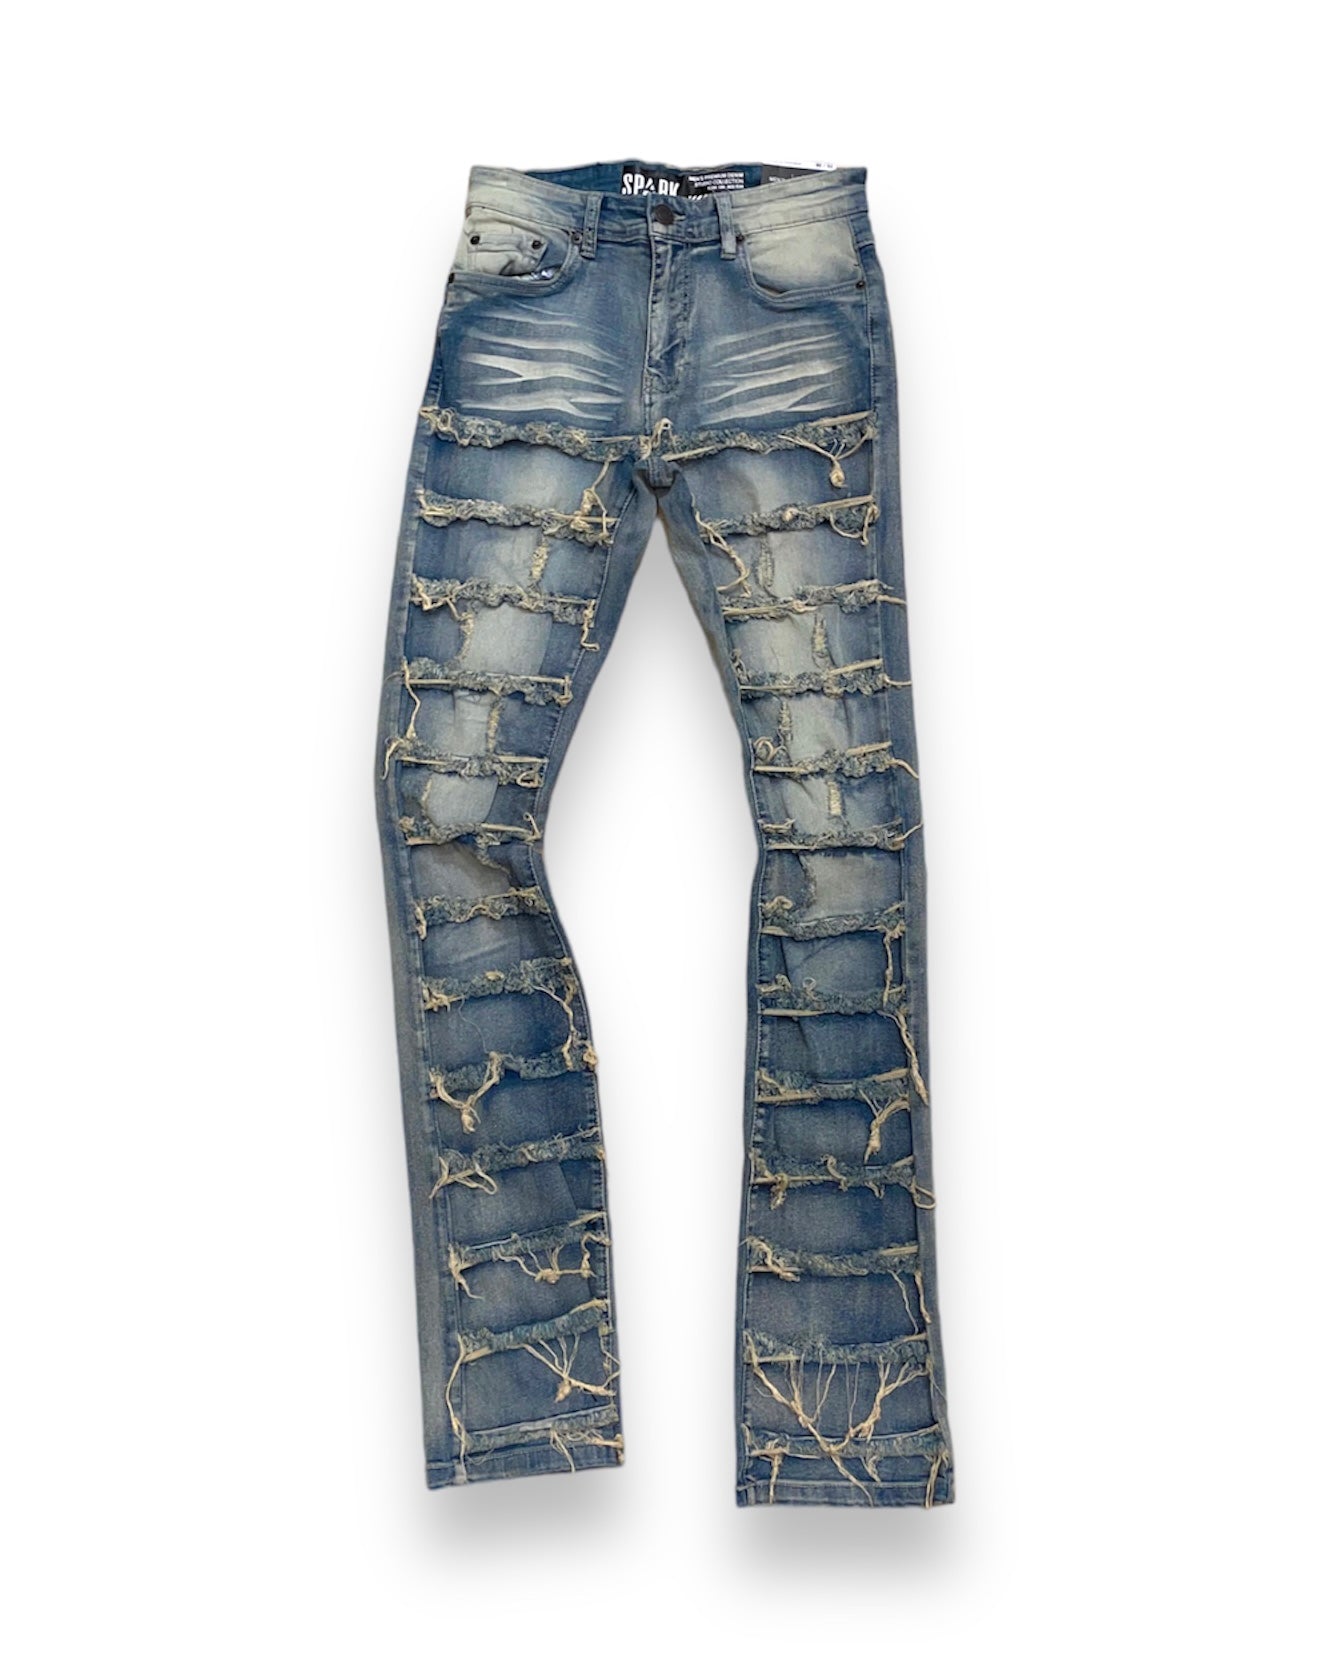 Stacked Jeans from Spark